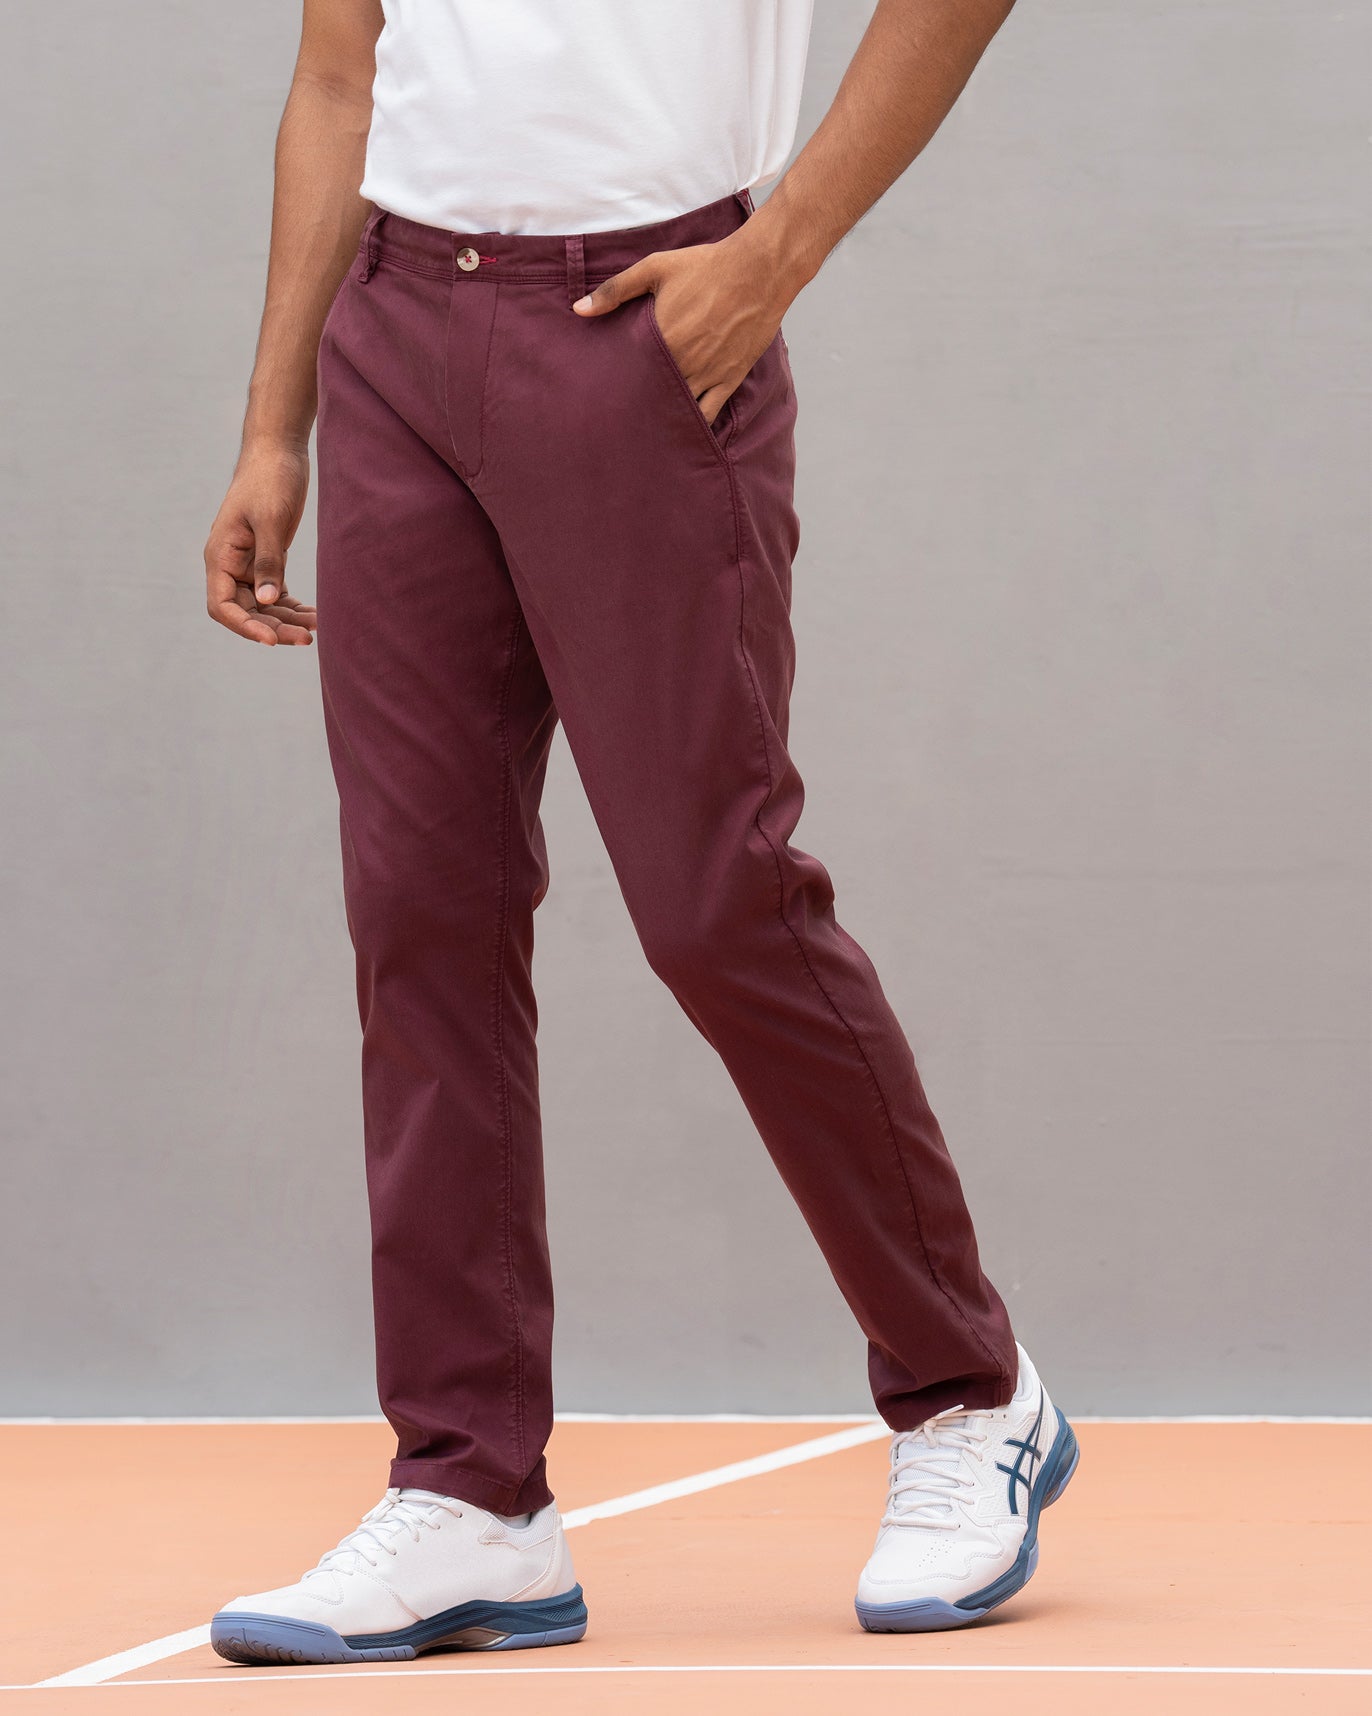 Ace Golf Trousers - Magenta